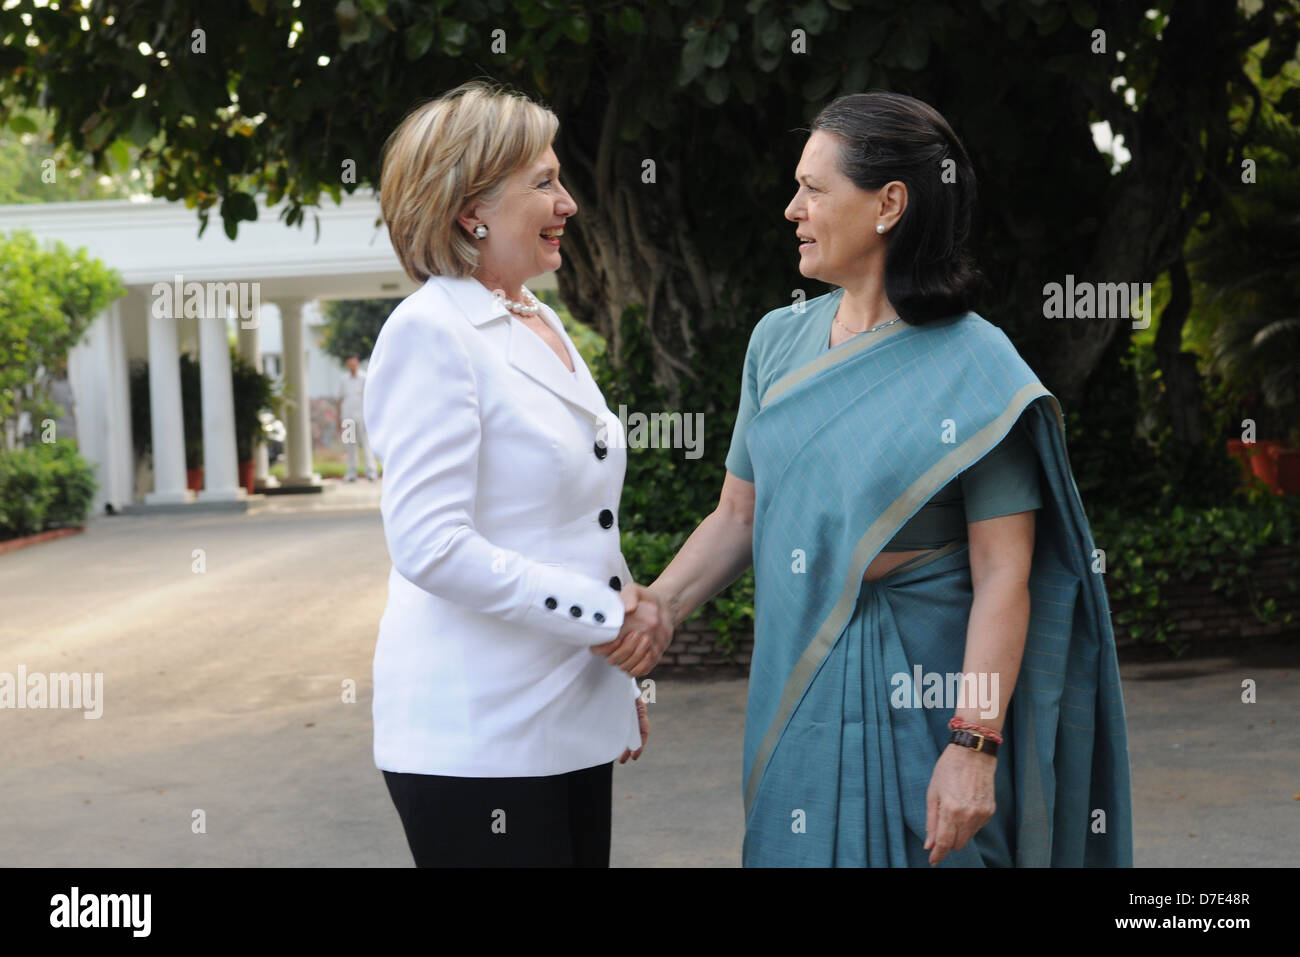 US Secretary of State Hillary Rodham Clinton meets with Sonia Gandhi, Indian Congress Party leader and wife of Former Prime Minister Rajiv Gandhi at her residence July 29, 2009 in New Delhi, India. Stock Photo